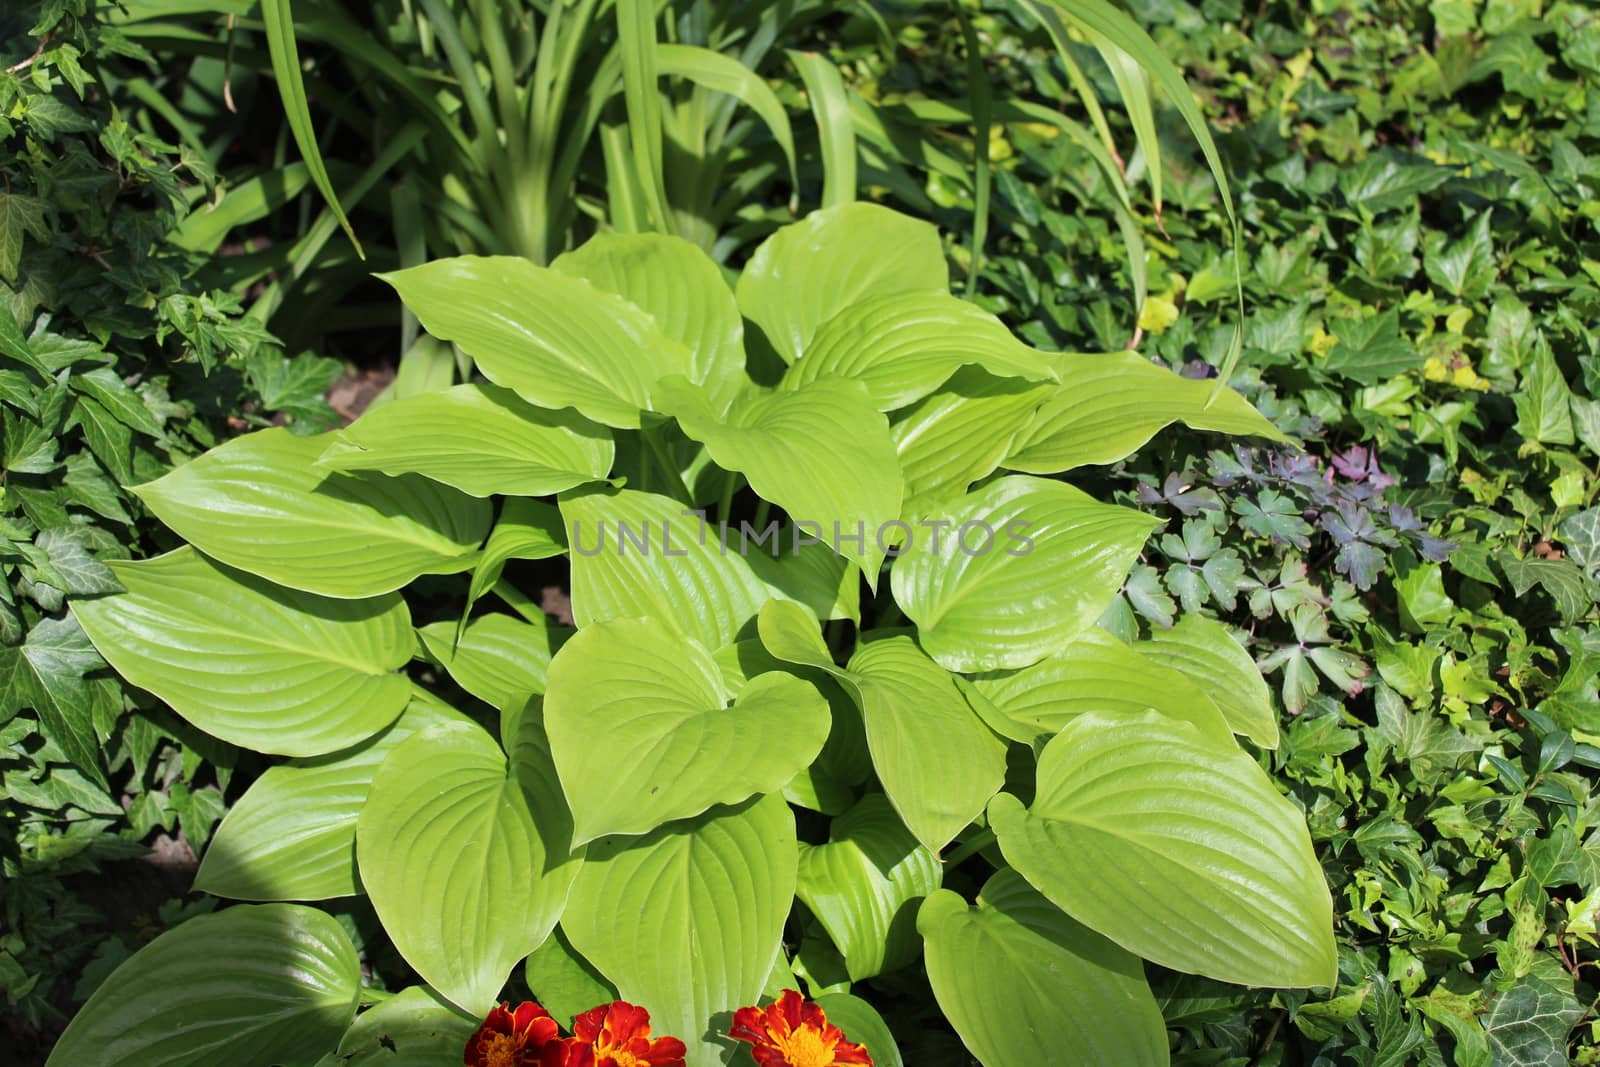 The picture shows a field of hostas in the garden